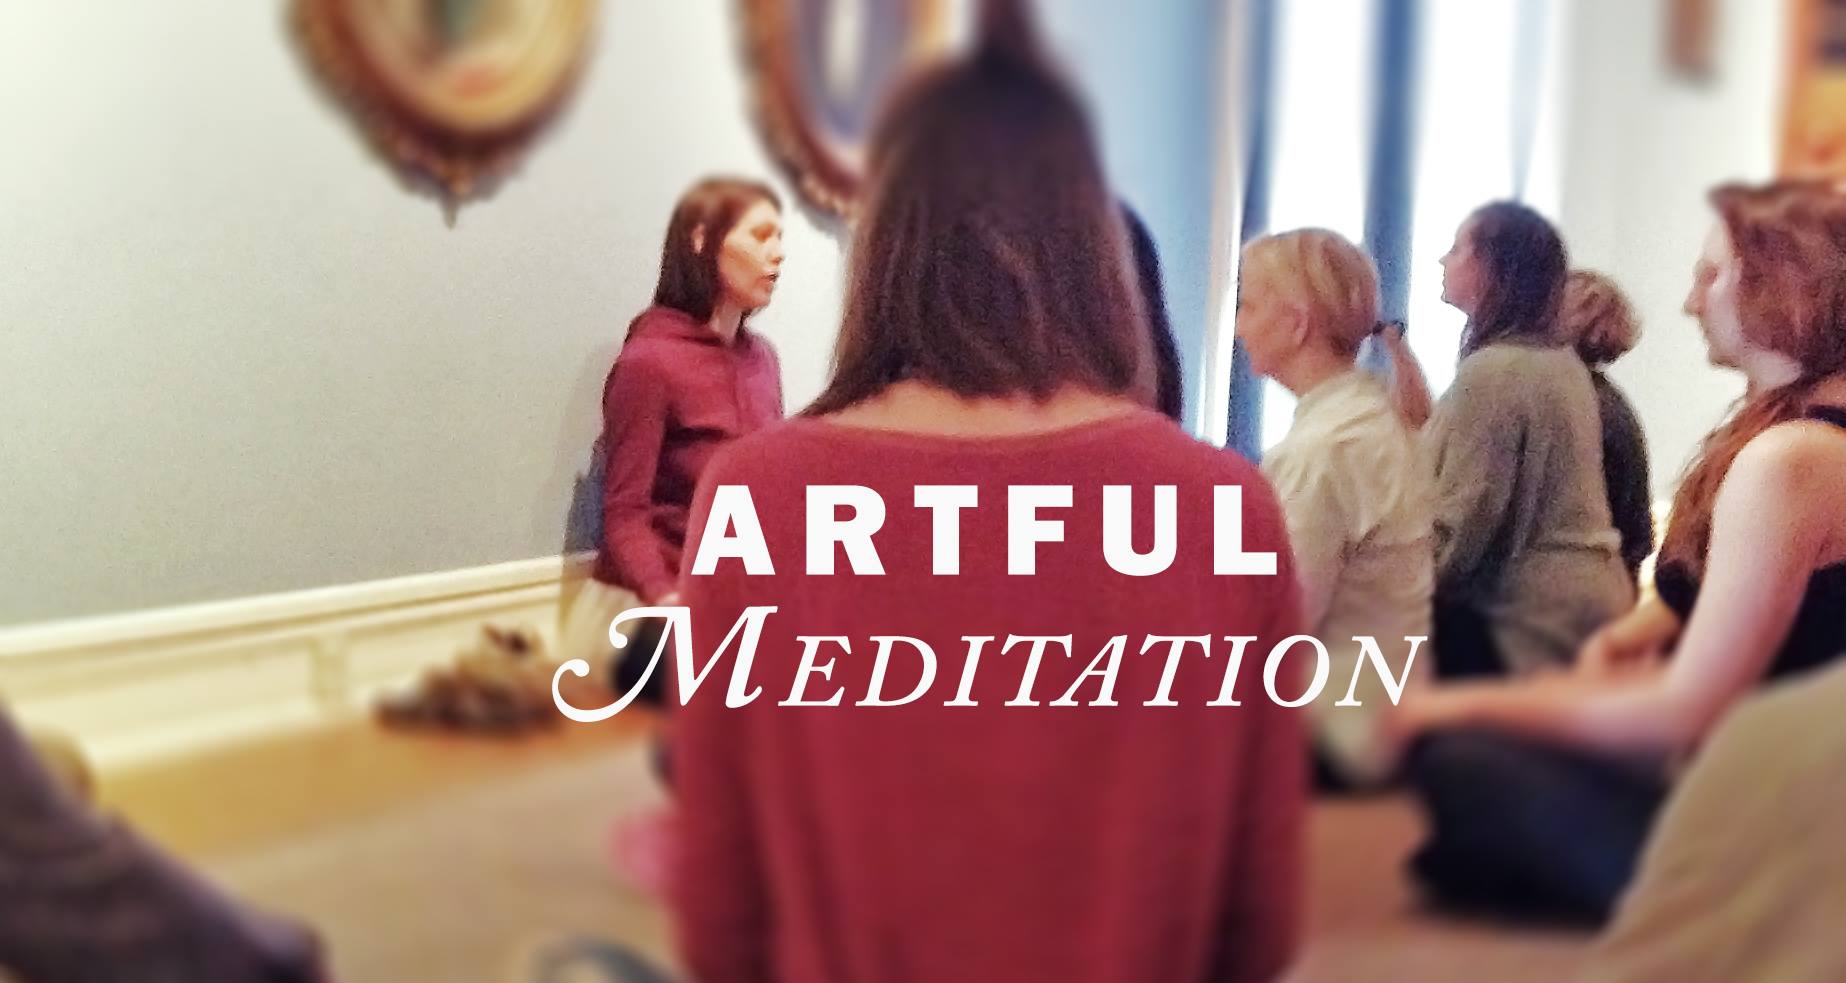 People seated in a gallery room with the text, "Artful meditation."